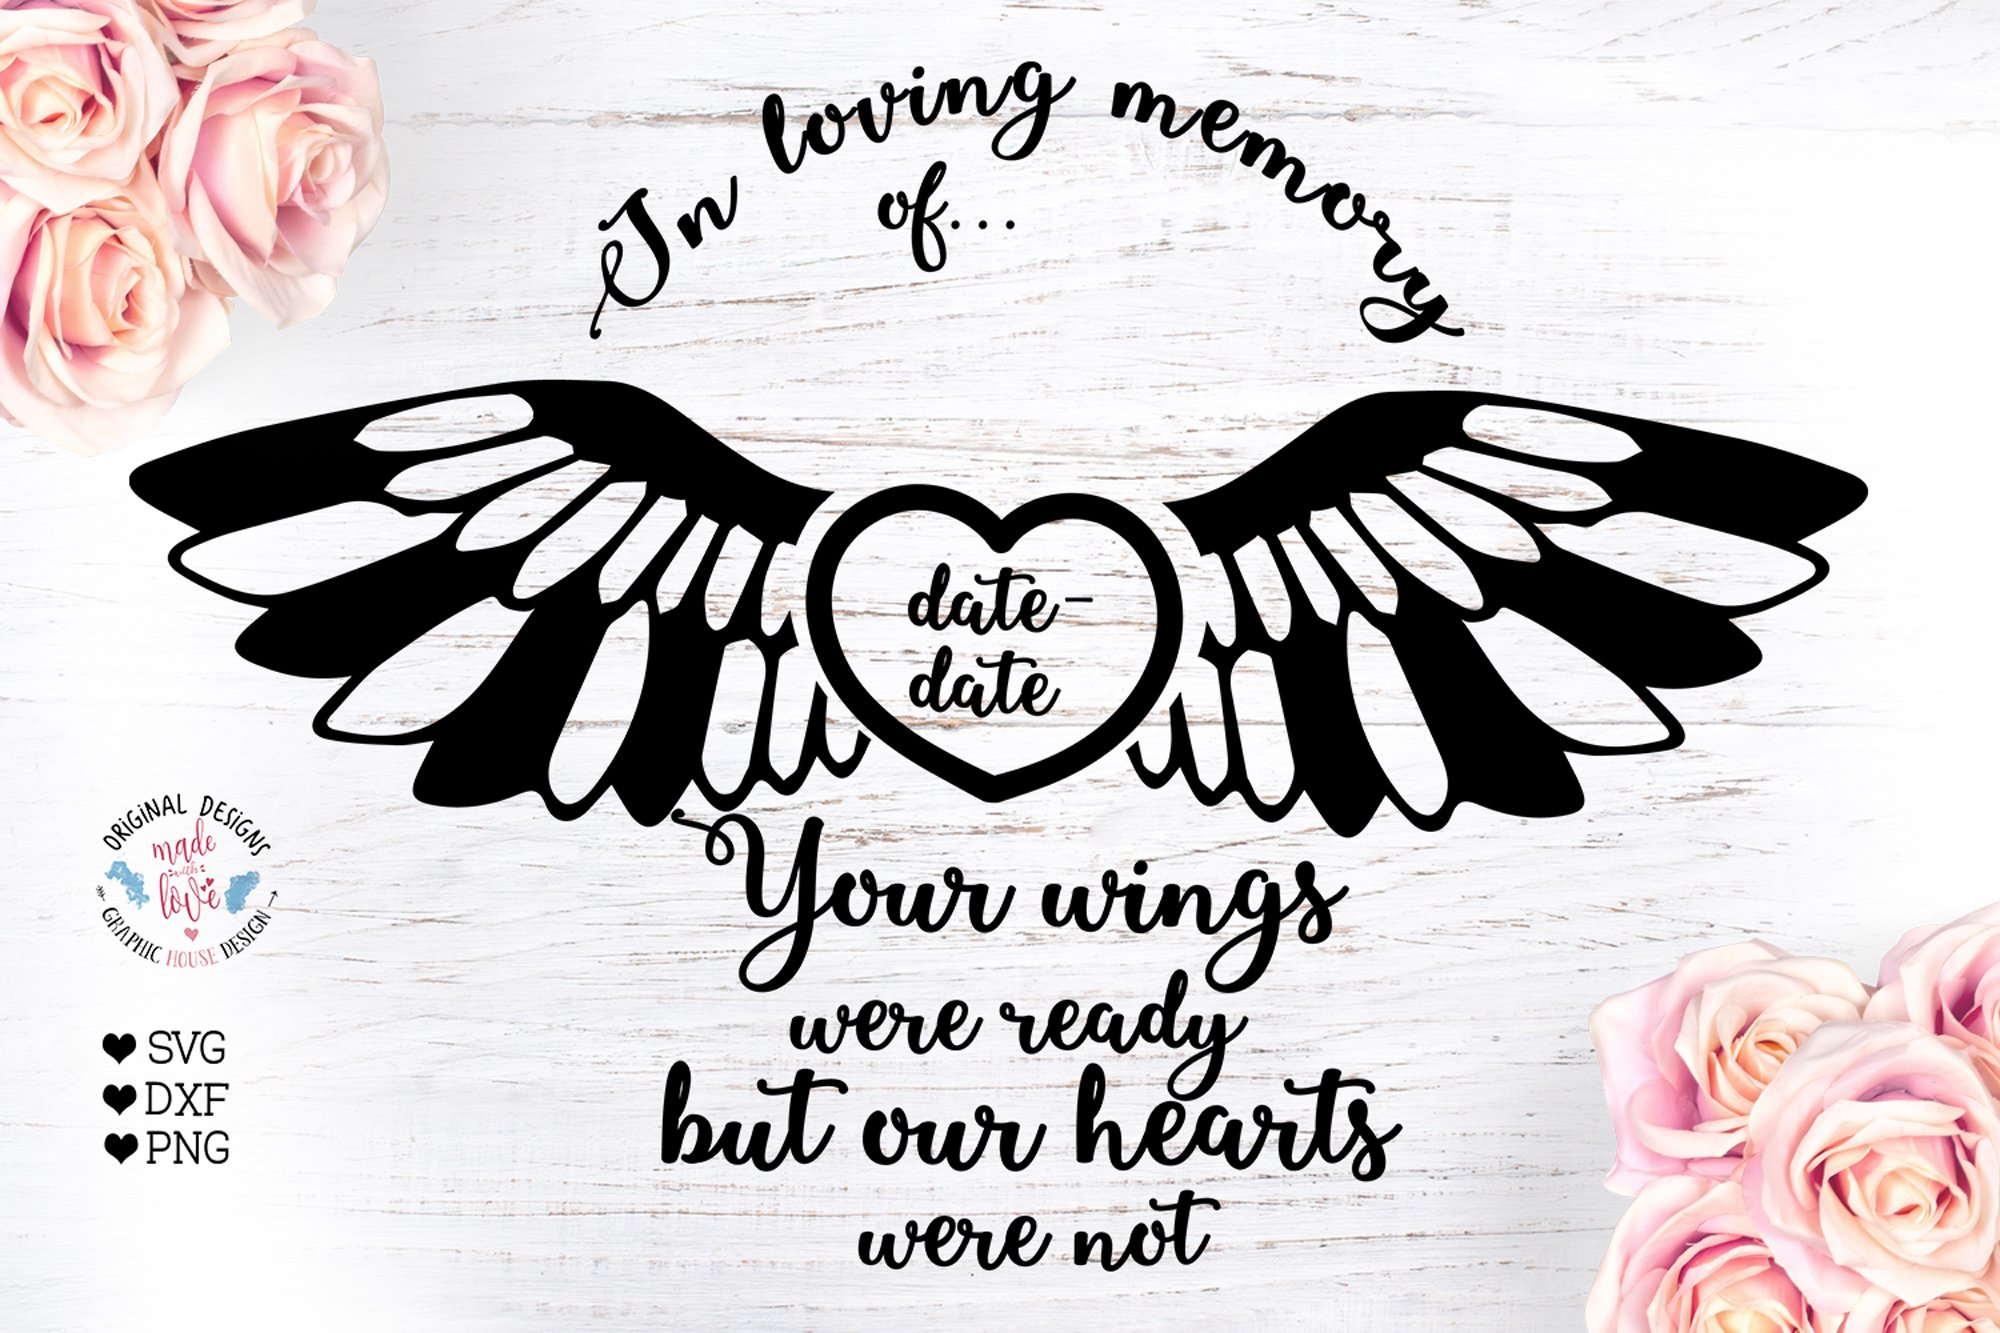 in loving memory customize picture templates free